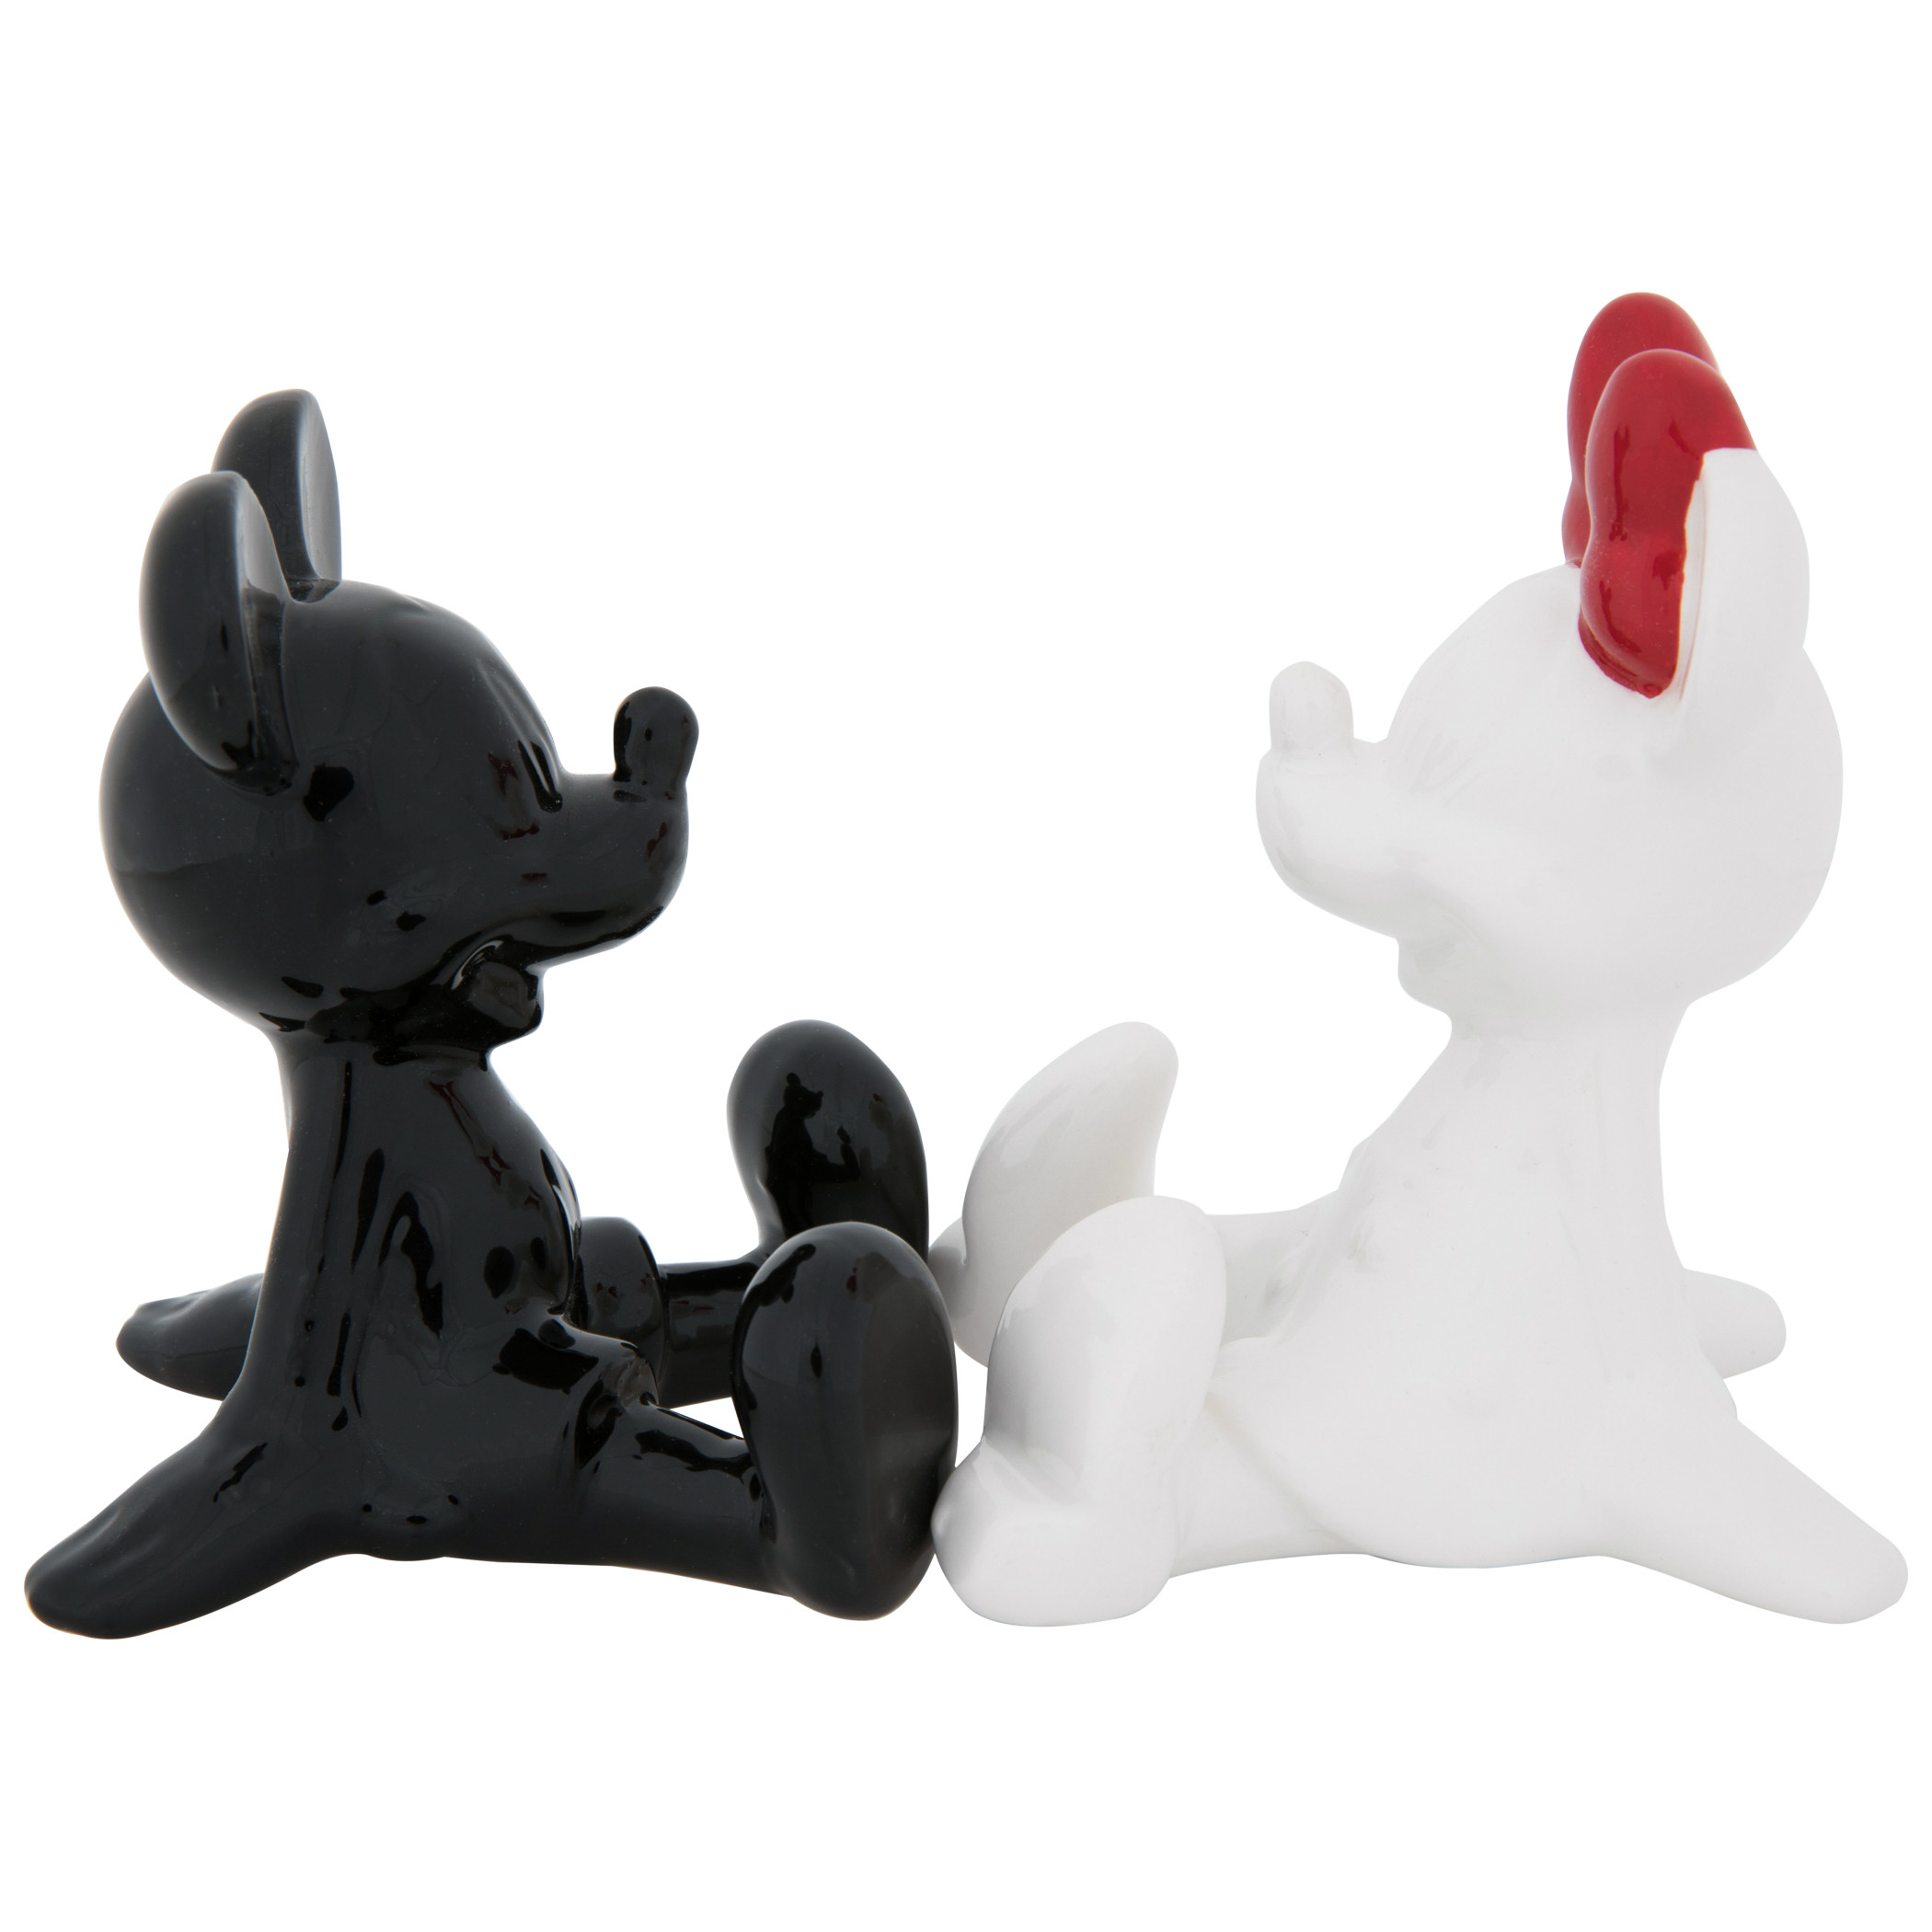 Mickey and Minnie Mouse Sitting Salt & Pepper Shakers